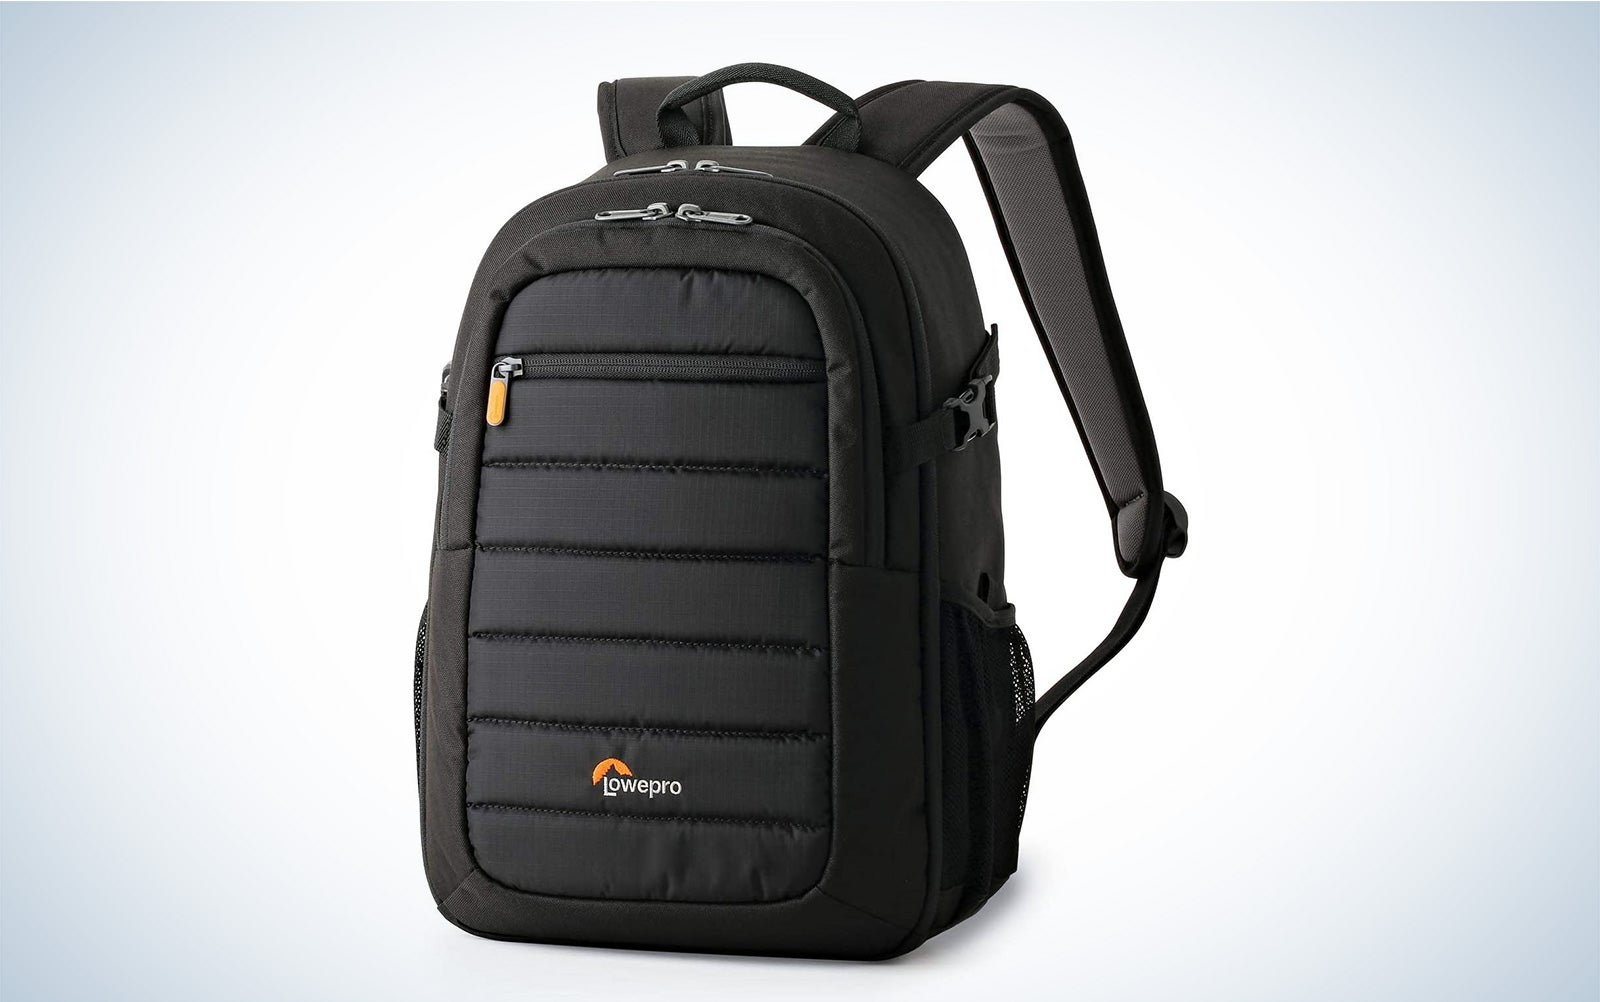 Lowepro Pro Runner 200 Aw Dslr Backpack in Bangalore at best price by  Qwikgear  Justdial